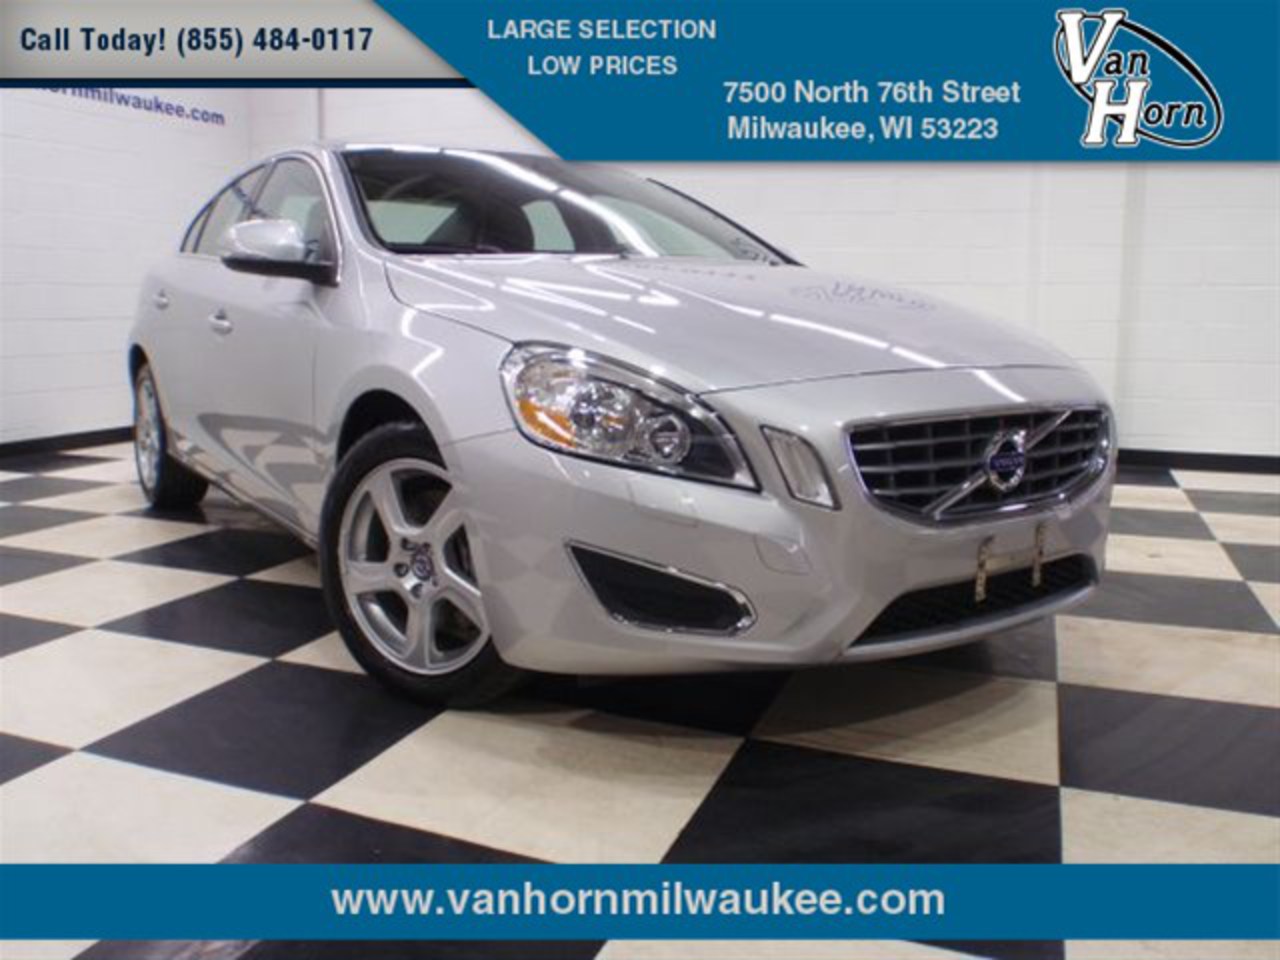 2012 Volvo S60 T5 Silver Black Fun and sporty CARFAX 1 owner and buyback